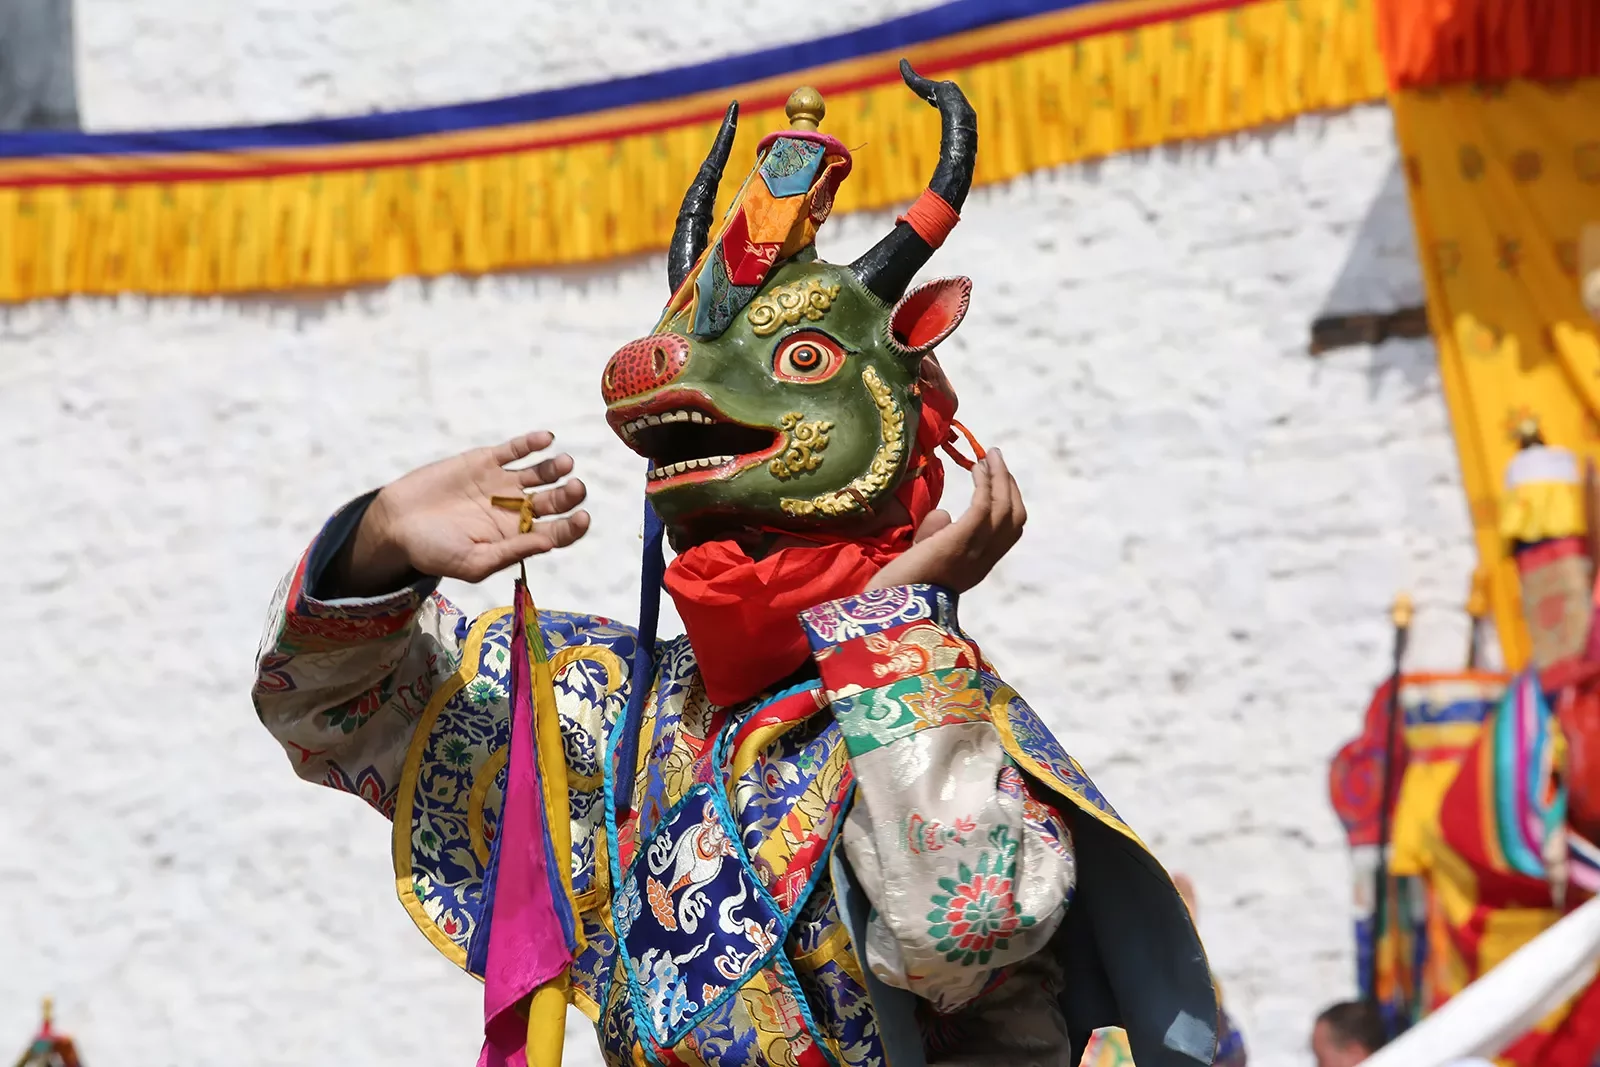 Performer wearing a mask during a performance in Bhutan